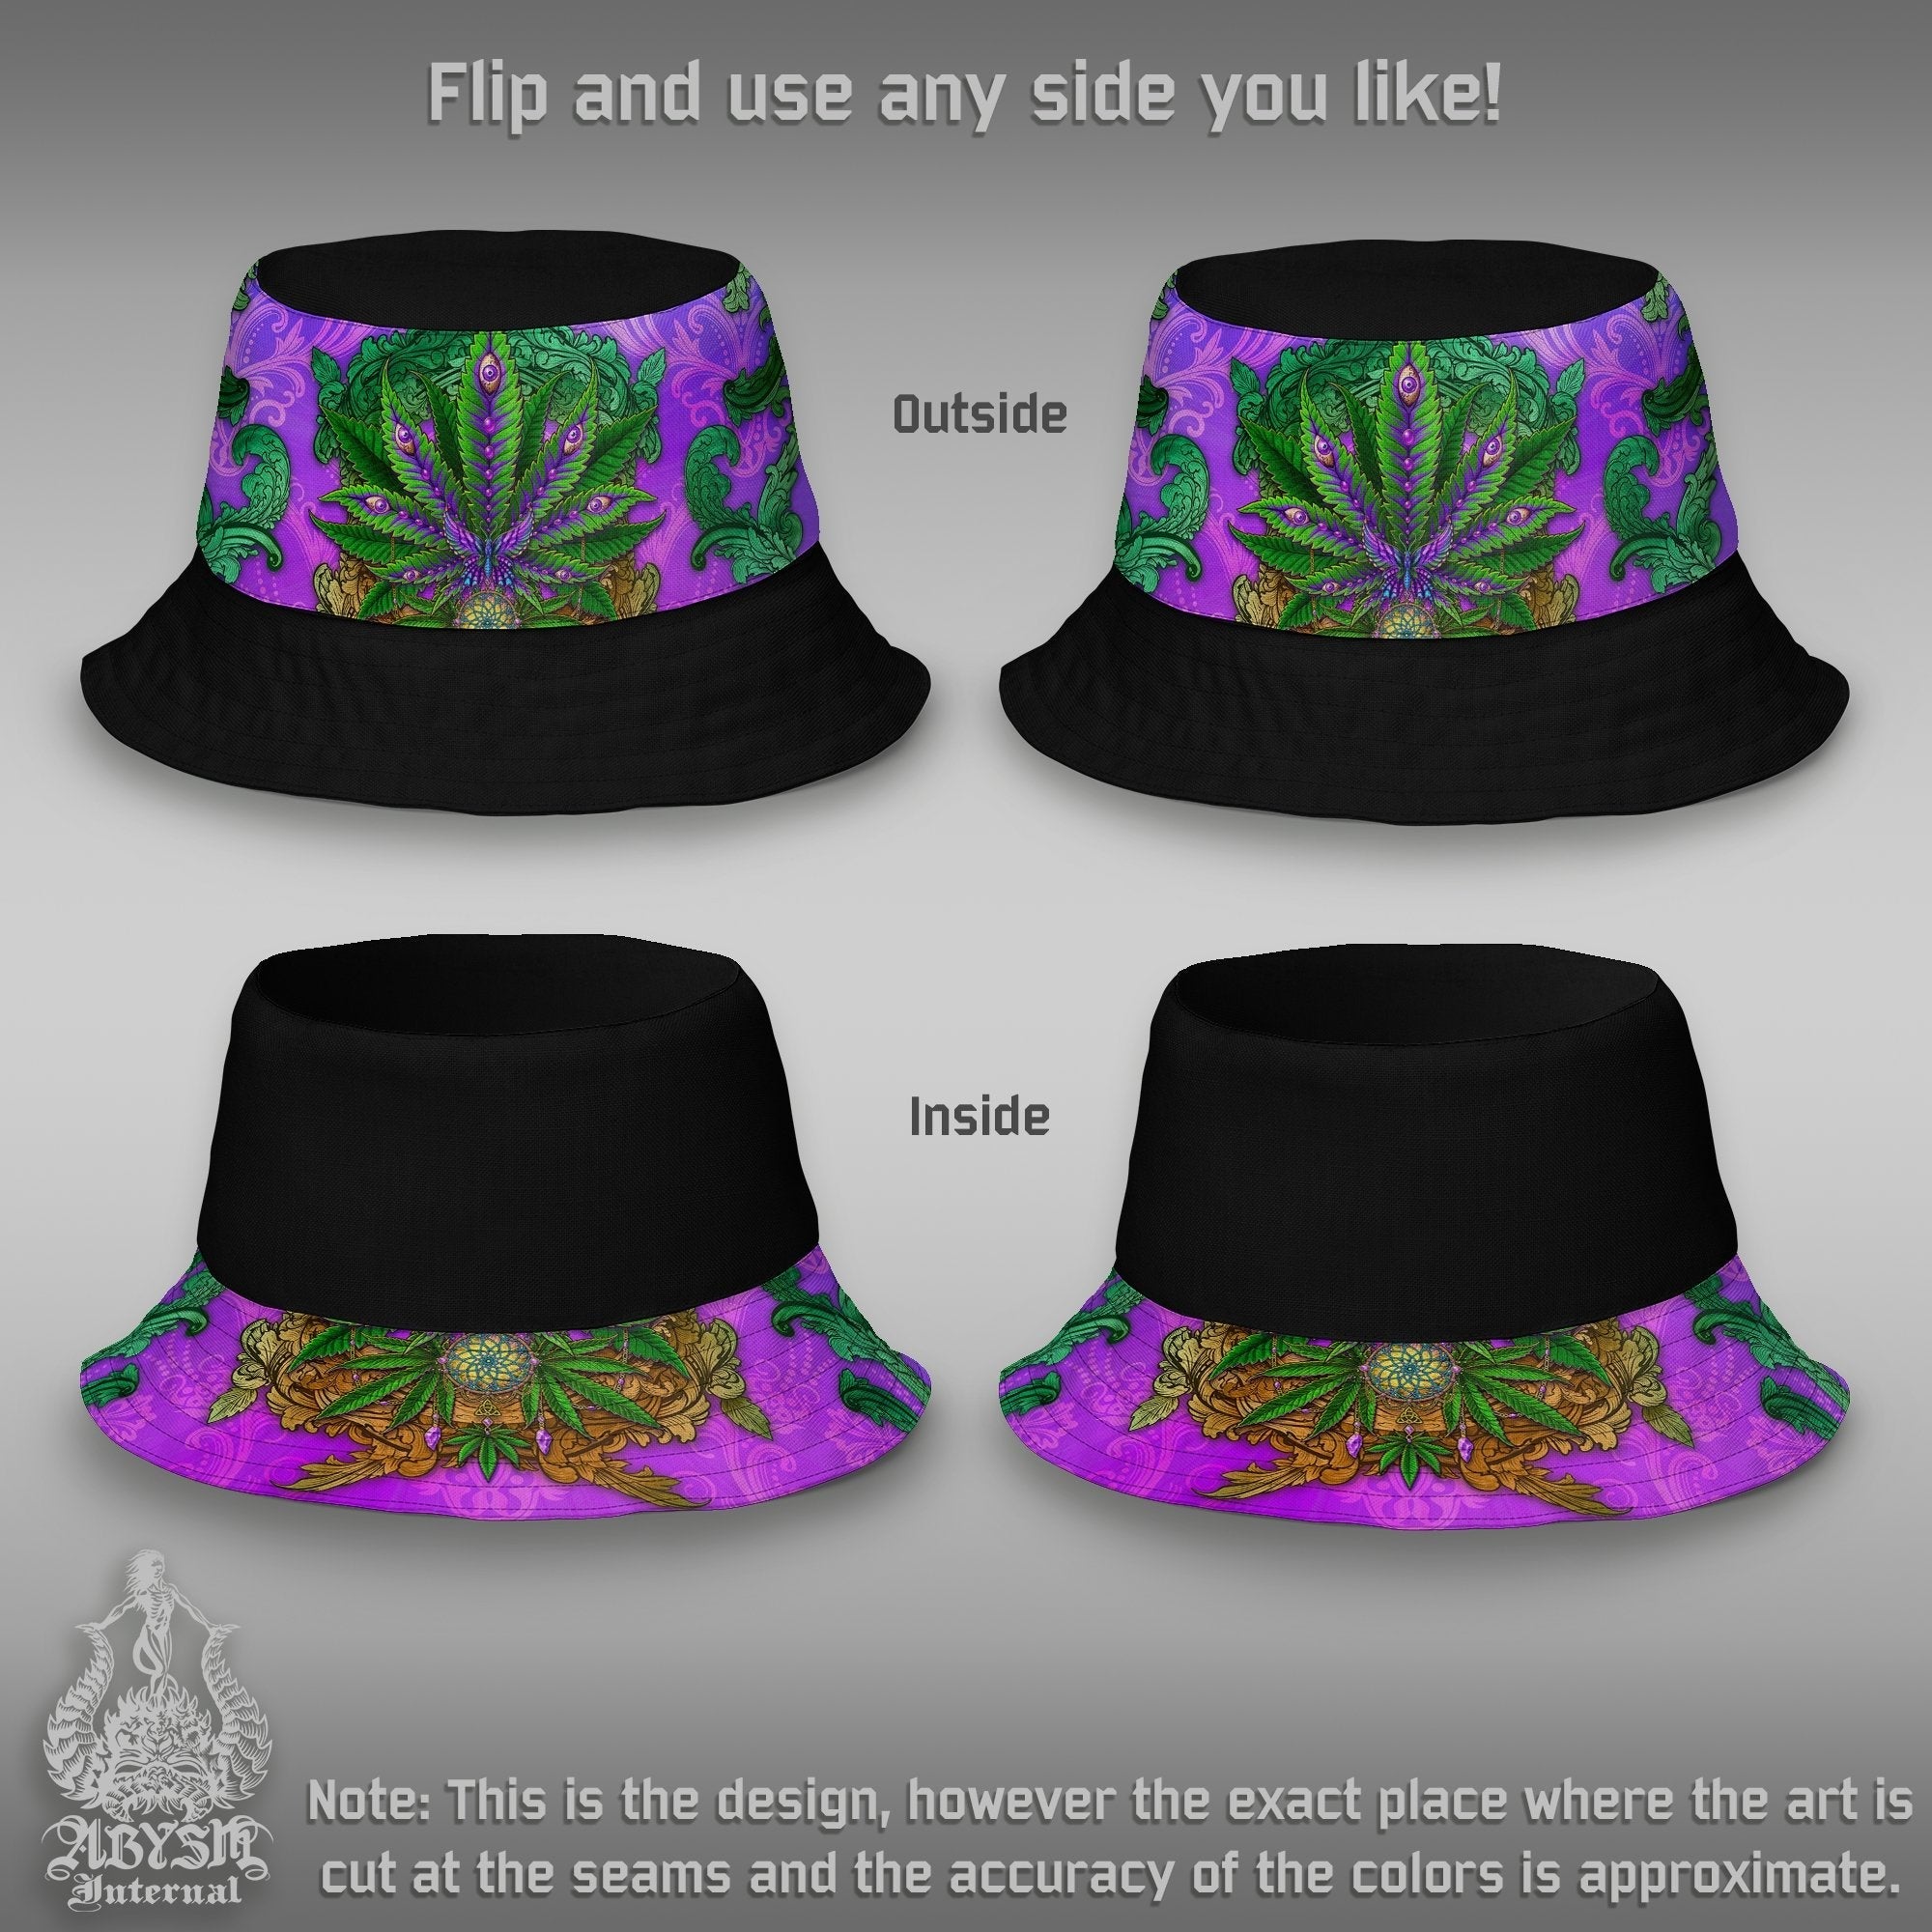 Cannabis Bucket Hat, Weed Streetwear, Indie Summer Hat, Boho and Hippie Beach Accessory with Linen feel, Reversible & Unisex, 420 Gift - Colorful Pot Art - Abysm Internal